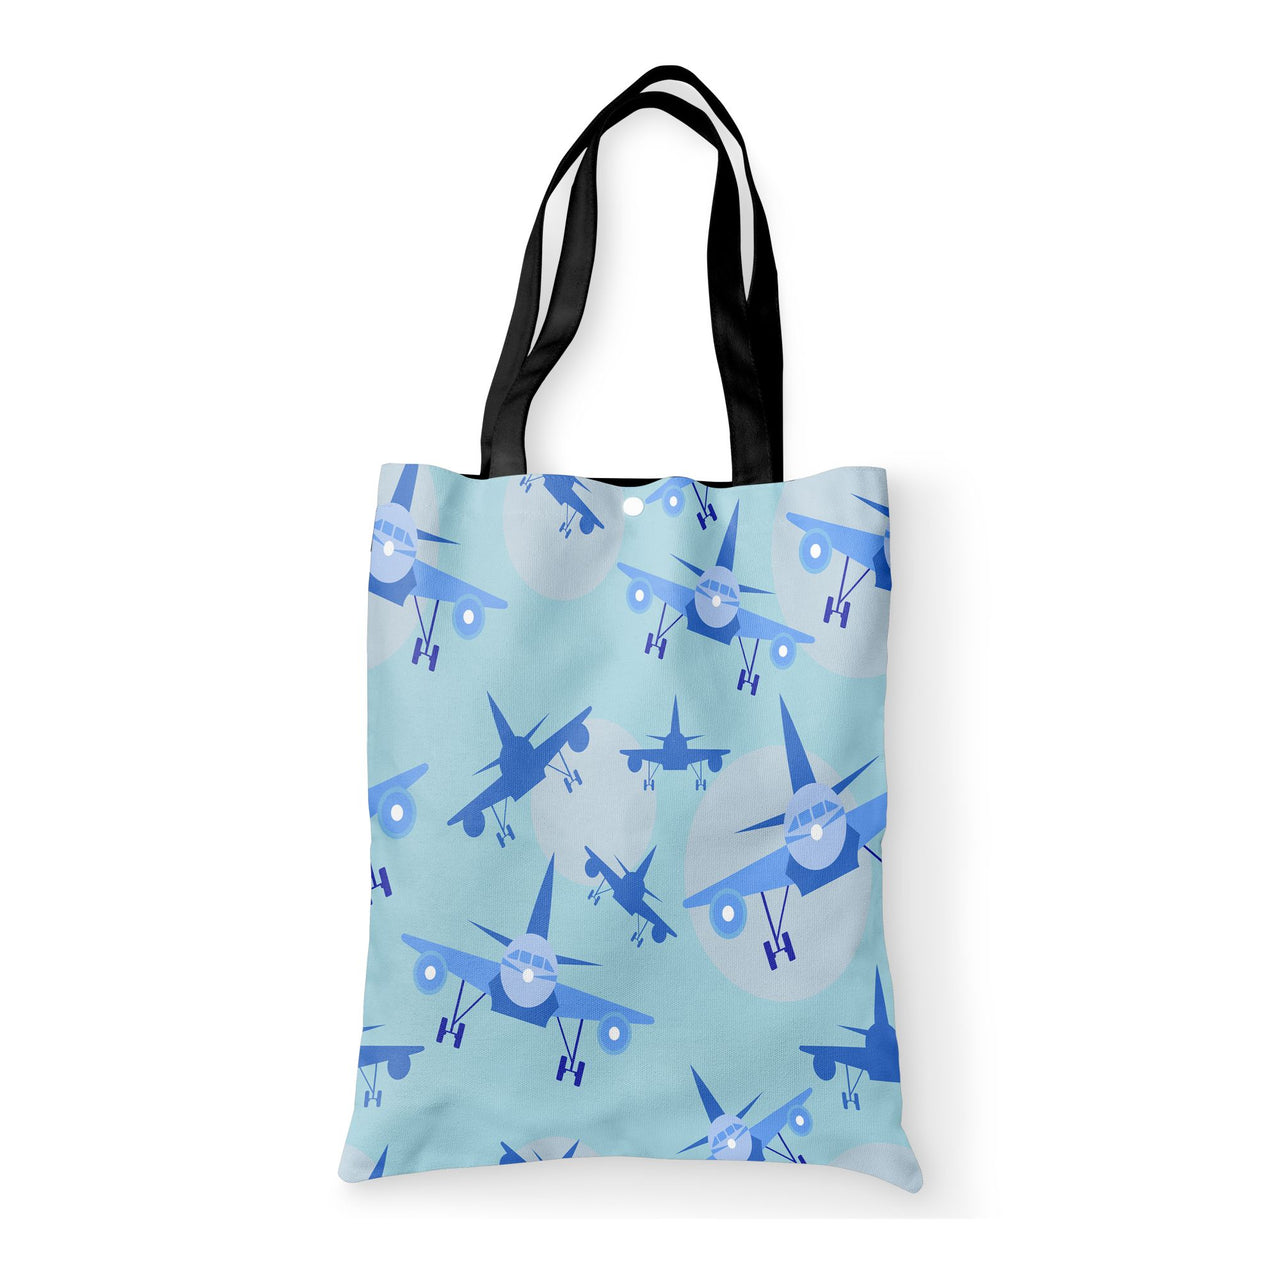 Super Funny Airplanes Designed Tote Bags